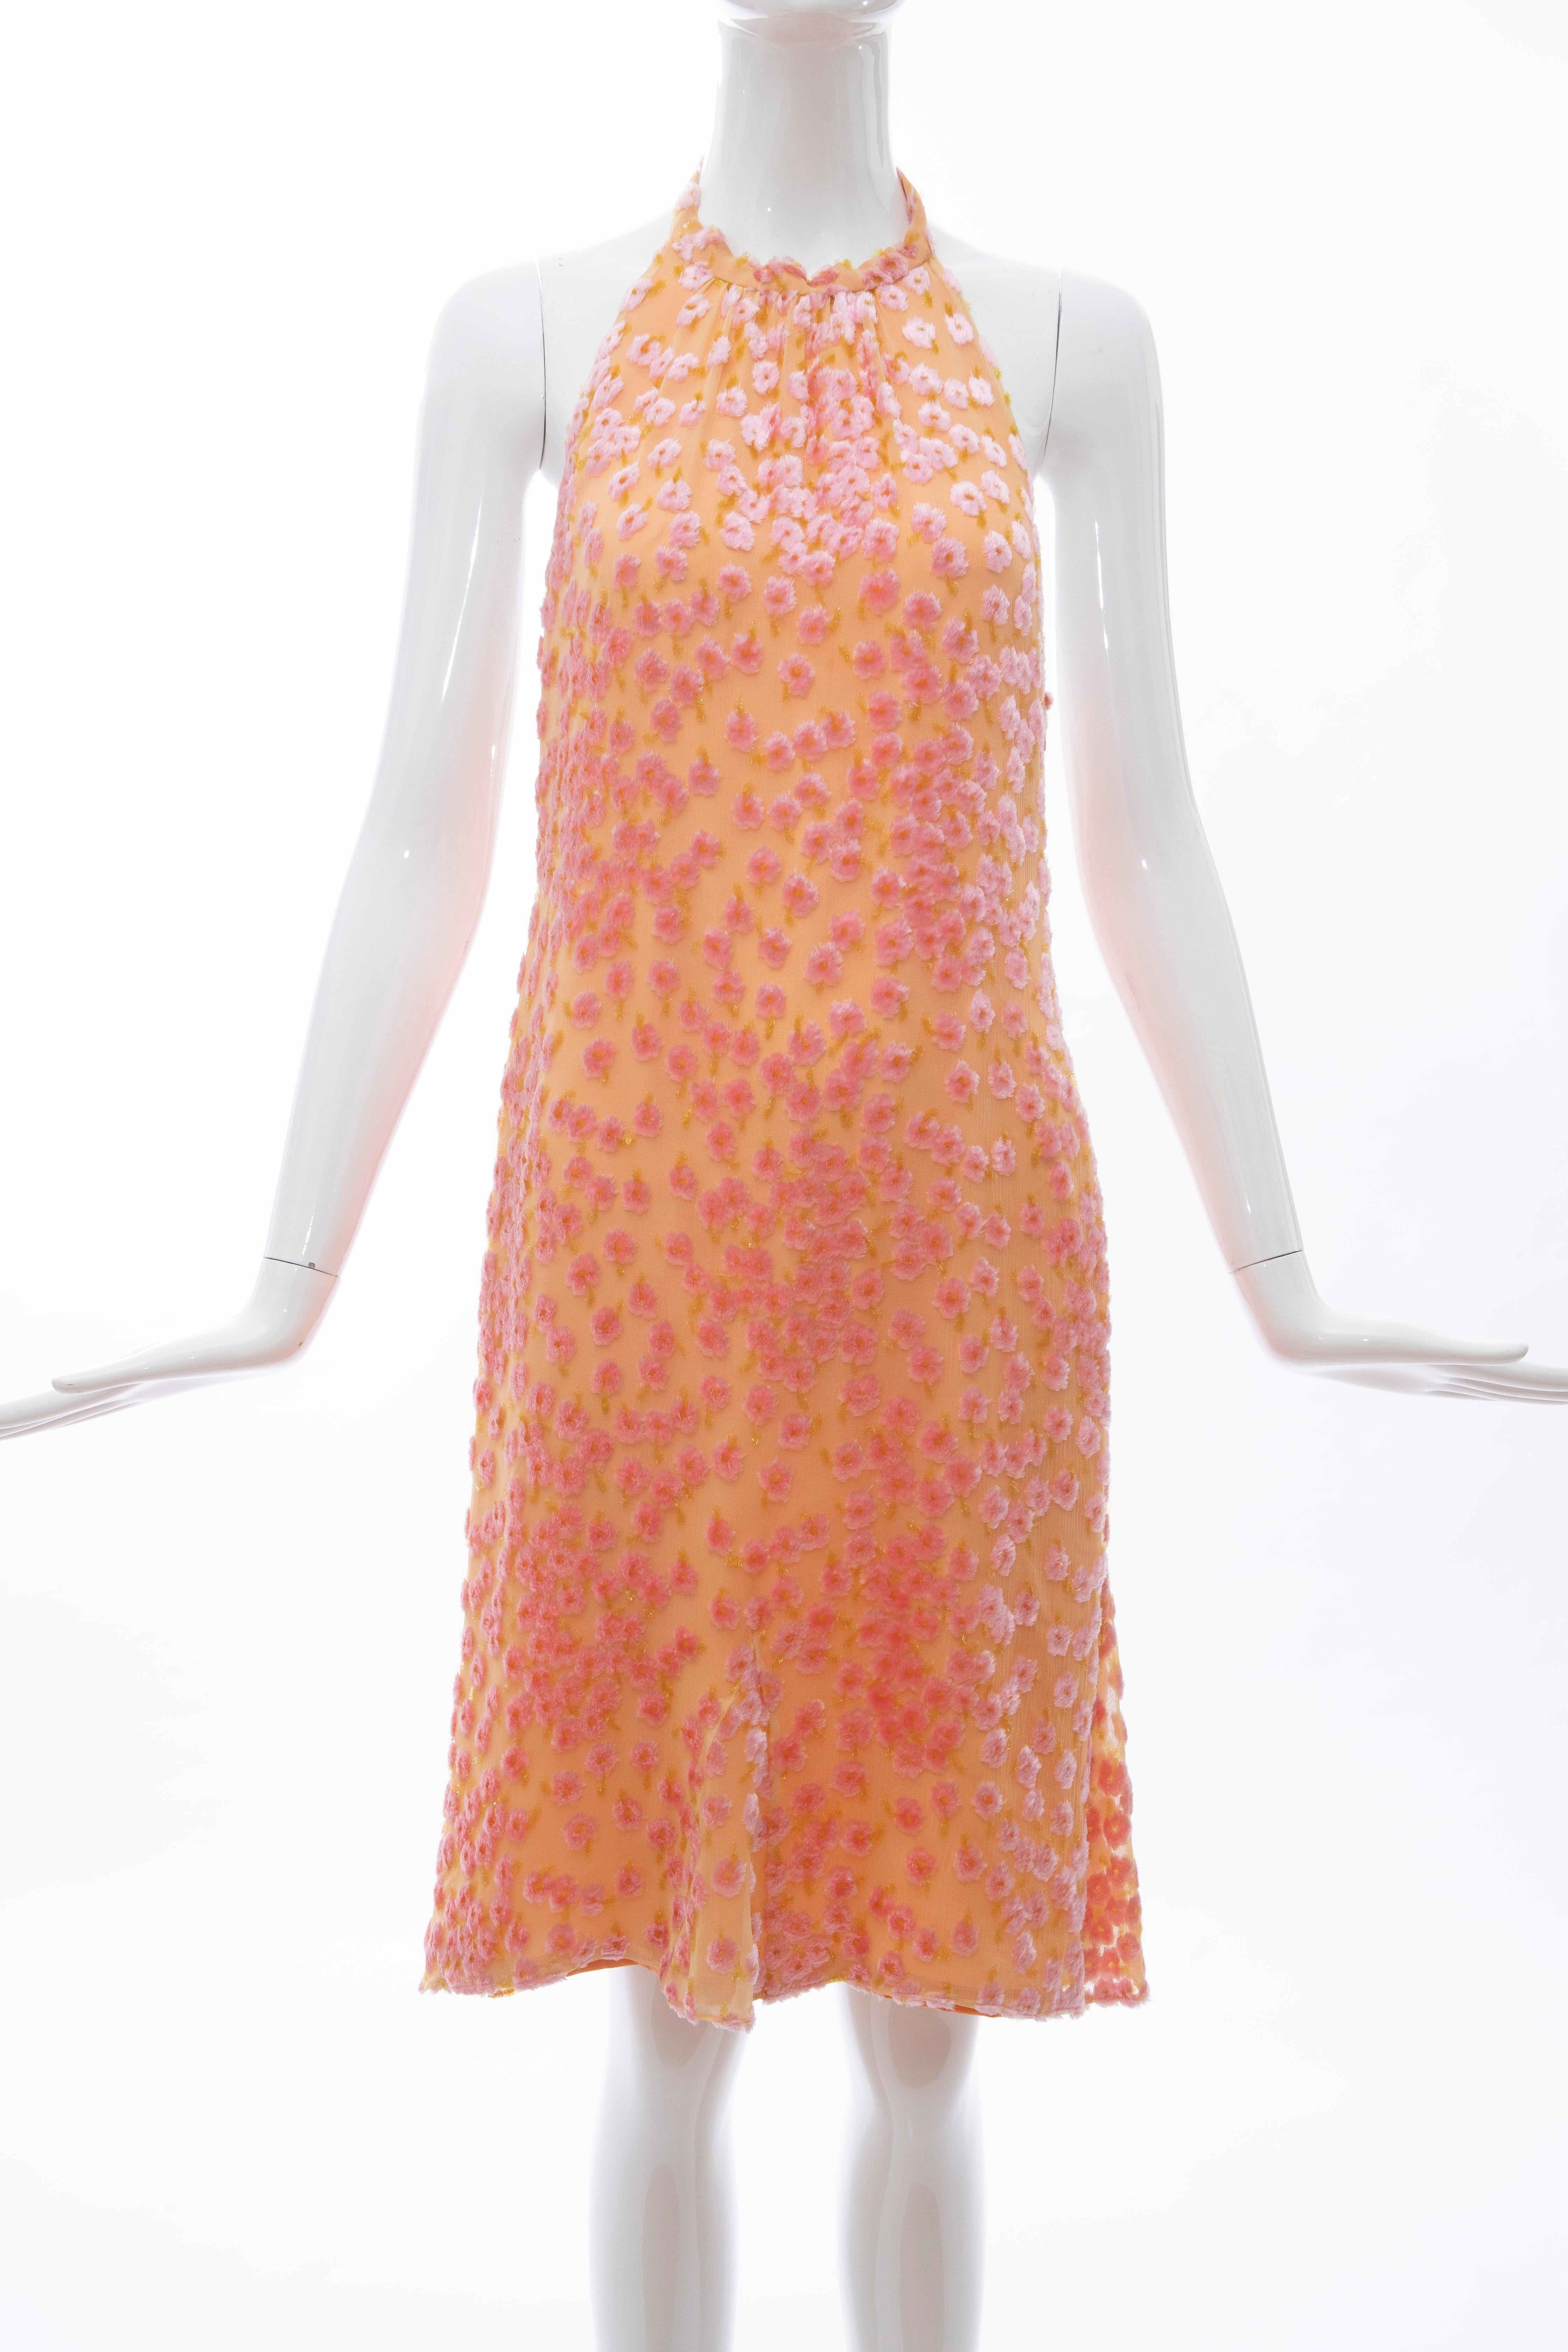 Chanel, Cruise 2001 tangerine & pink voided silk chiffon velvet halter dress, side zip closure and fully lined in silk.

FR. 40
Bust: 30, Waist: 30, Hip: 36, Length: 39